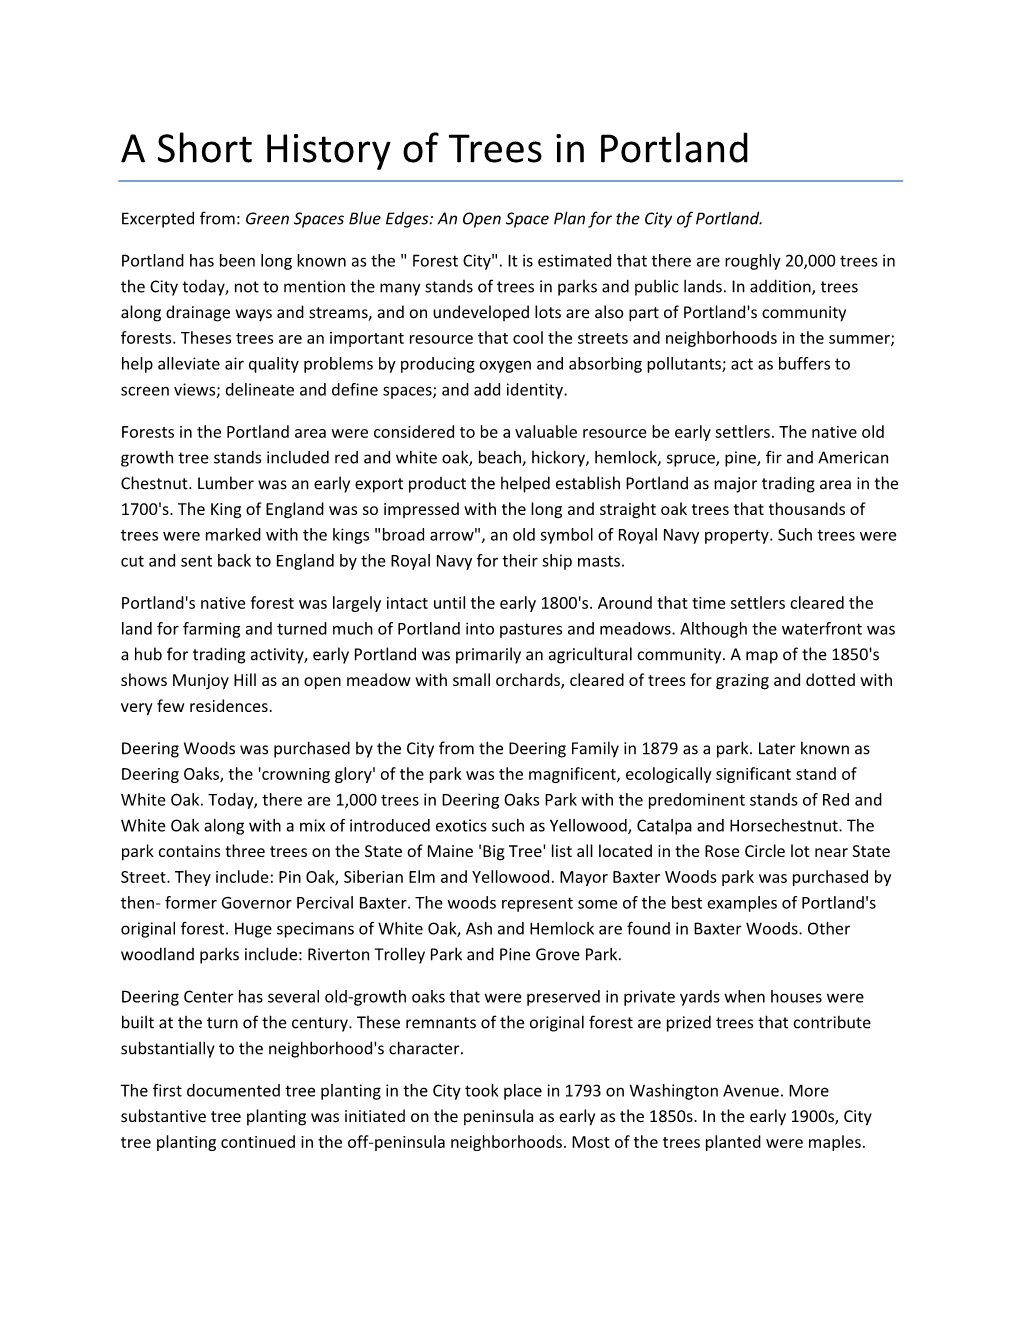 A Short History of Trees in Portland